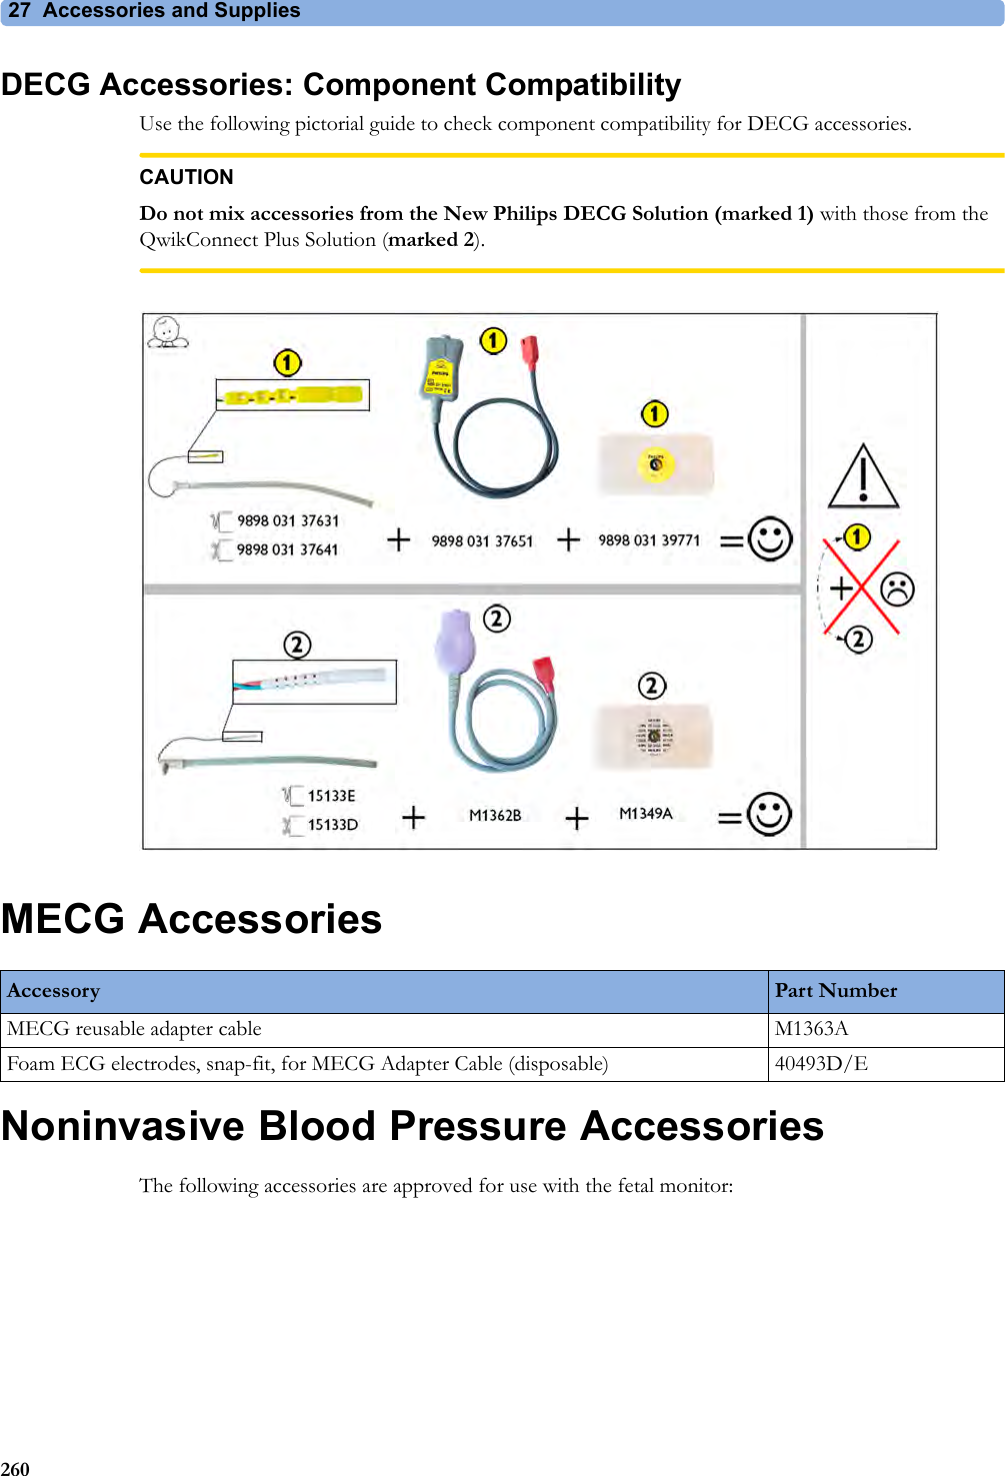 27 Accessories and Supplies260DECG Accessories: Component CompatibilityUse the following pictorial guide to check component compatibility for DECG accessories.CAUTIONDo not mix accessories from the New Philips DECG Solution (marked 1) with those from the QwikConnect Plus Solution (marked 2).MECG AccessoriesNoninvasive Blood Pressure AccessoriesThe following accessories are approved for use with the fetal monitor:Accessory Part NumberMECG reusable adapter cable M1363AFoam ECG electrodes, snap-fit, for MECG Adapter Cable (disposable) 40493D/E